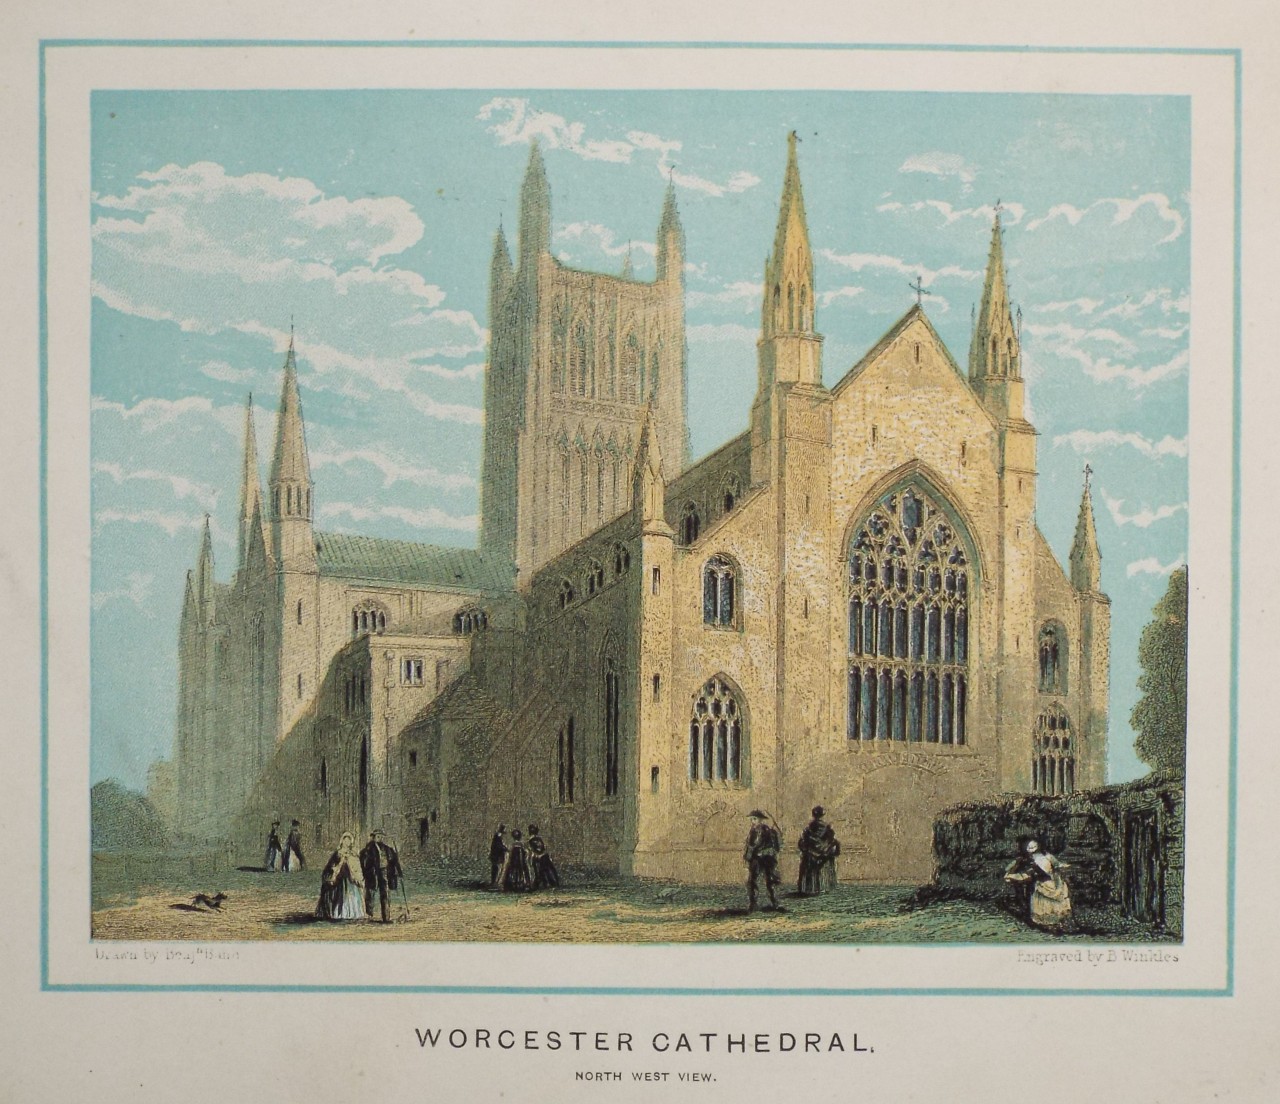 Chromo-lithograph - Worcester Cathedral. North West View.